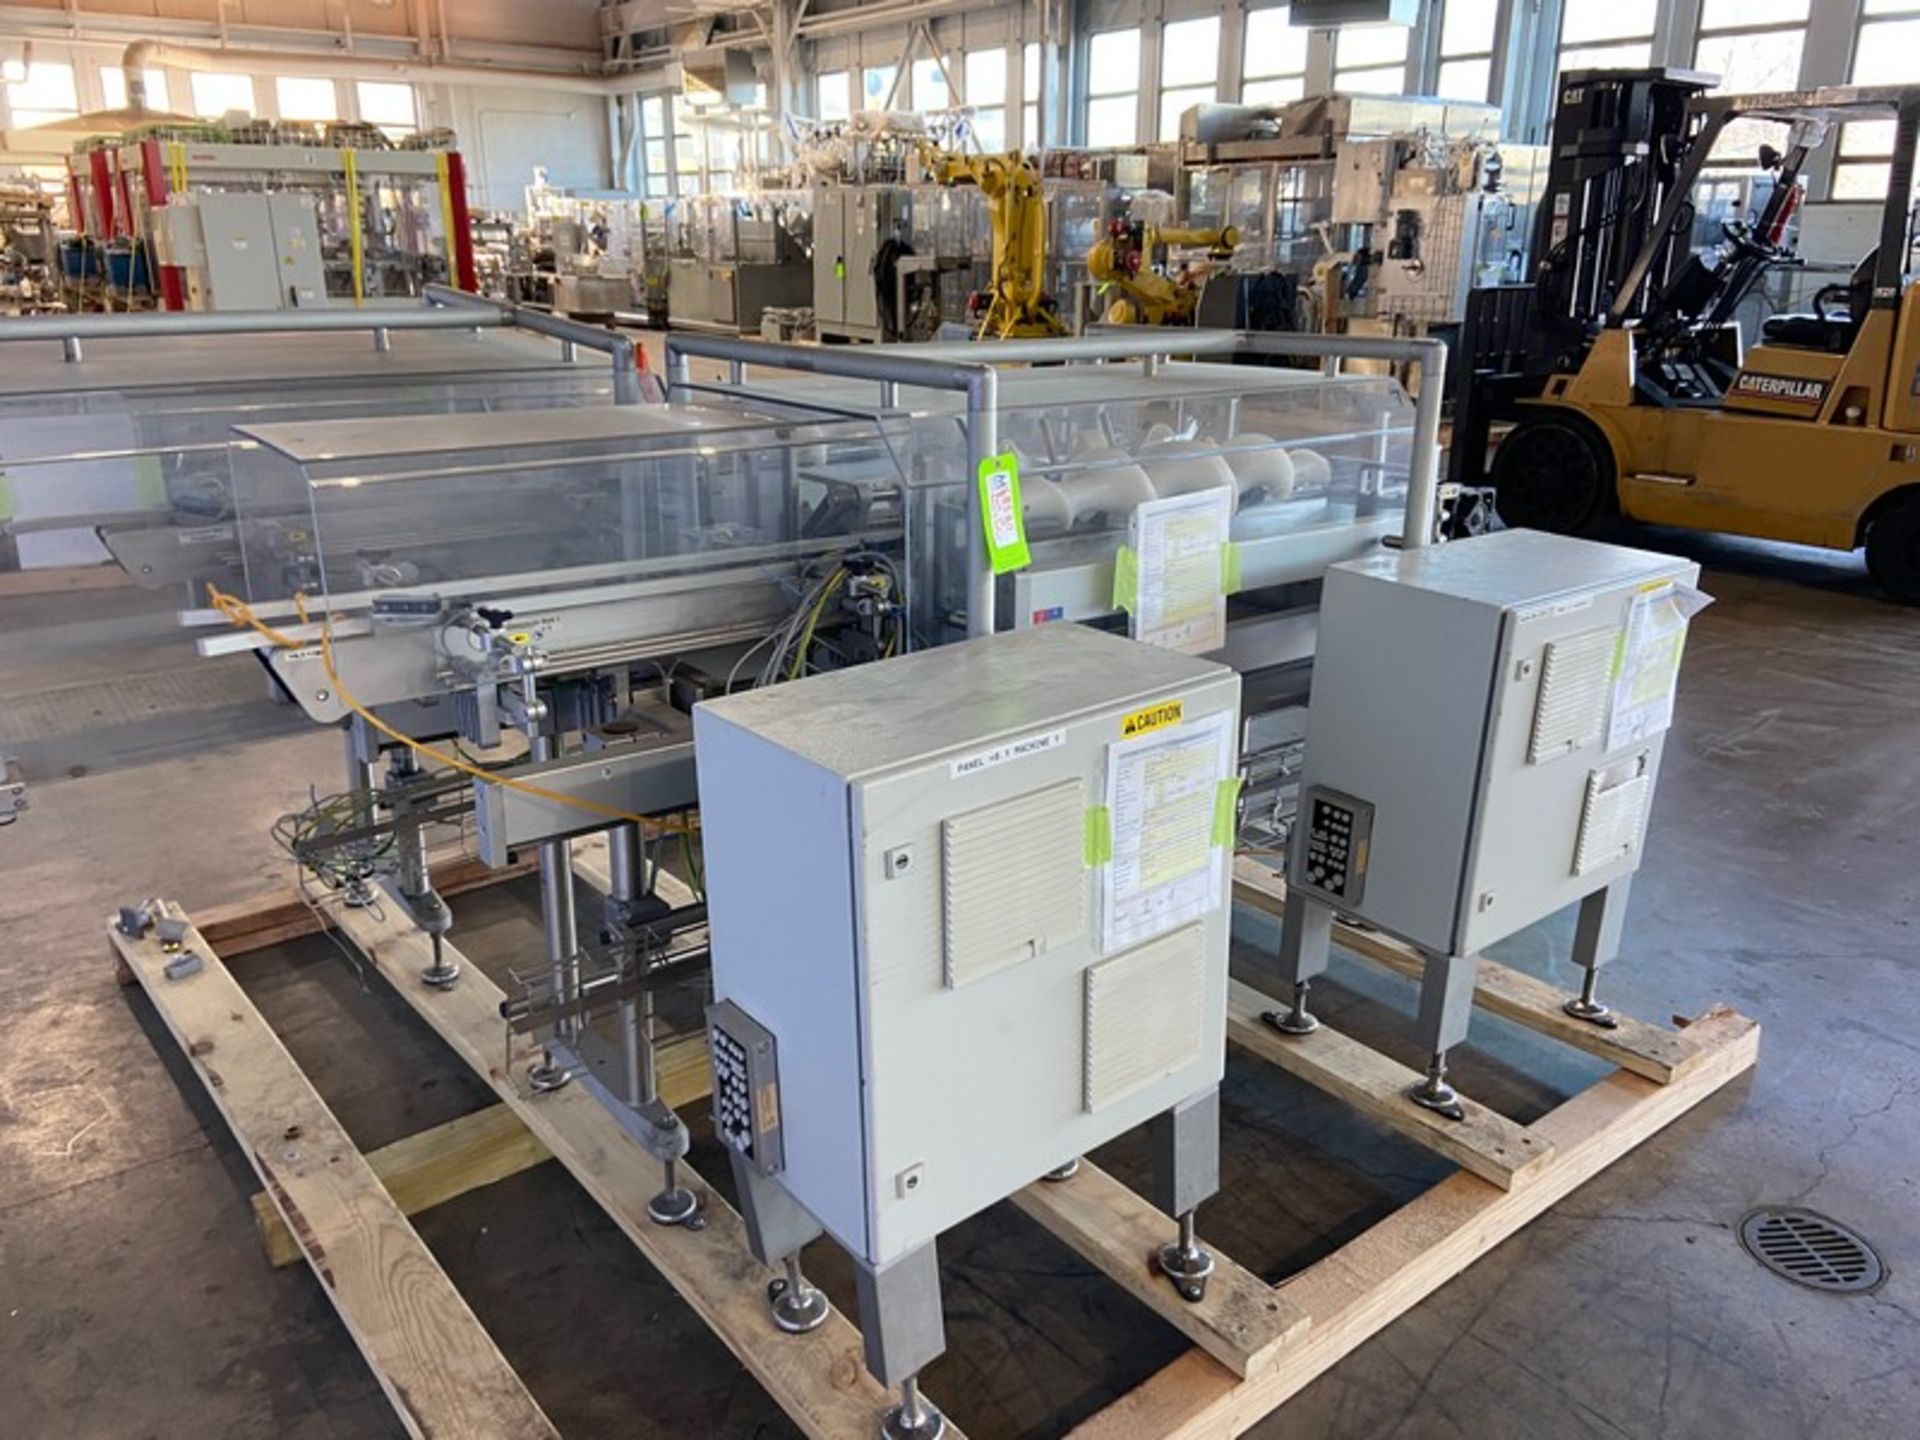 2010 Somic Verpackungsmaschinen Tray Packer,Type: WA 424-DT/2, Machine No.: N-10127/10, 480 Volts, 3 - Image 28 of 28